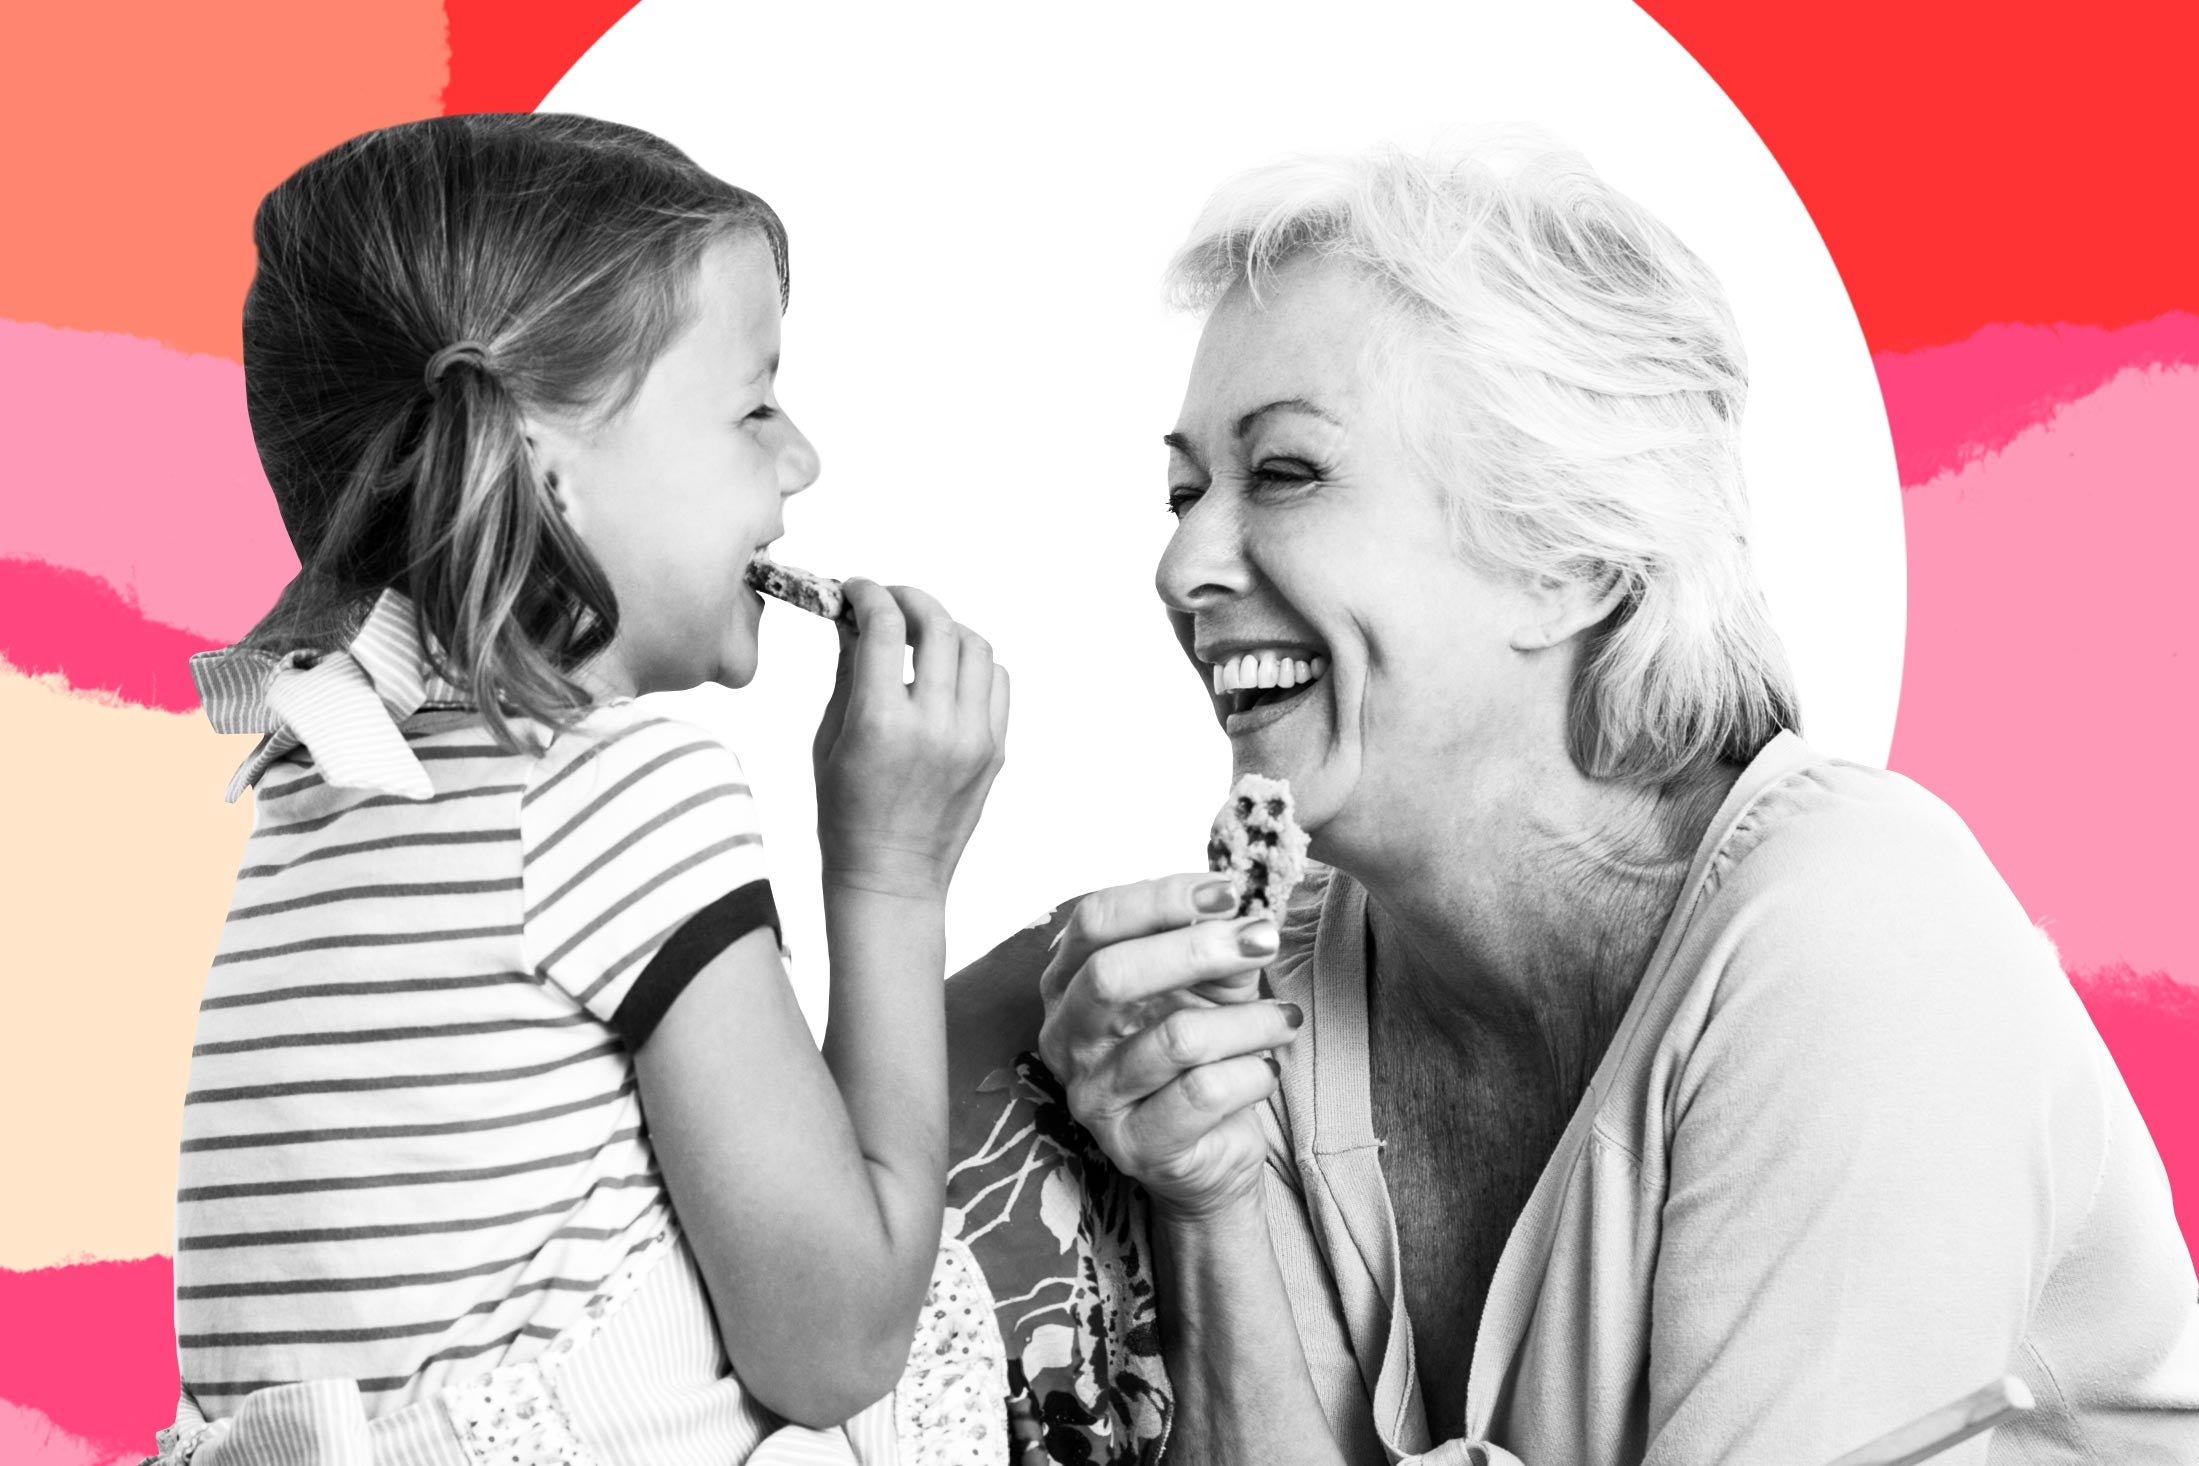 Photo illustration showing a toddler eating a cookie while a grandmother figure eats a cookie and grins at her.